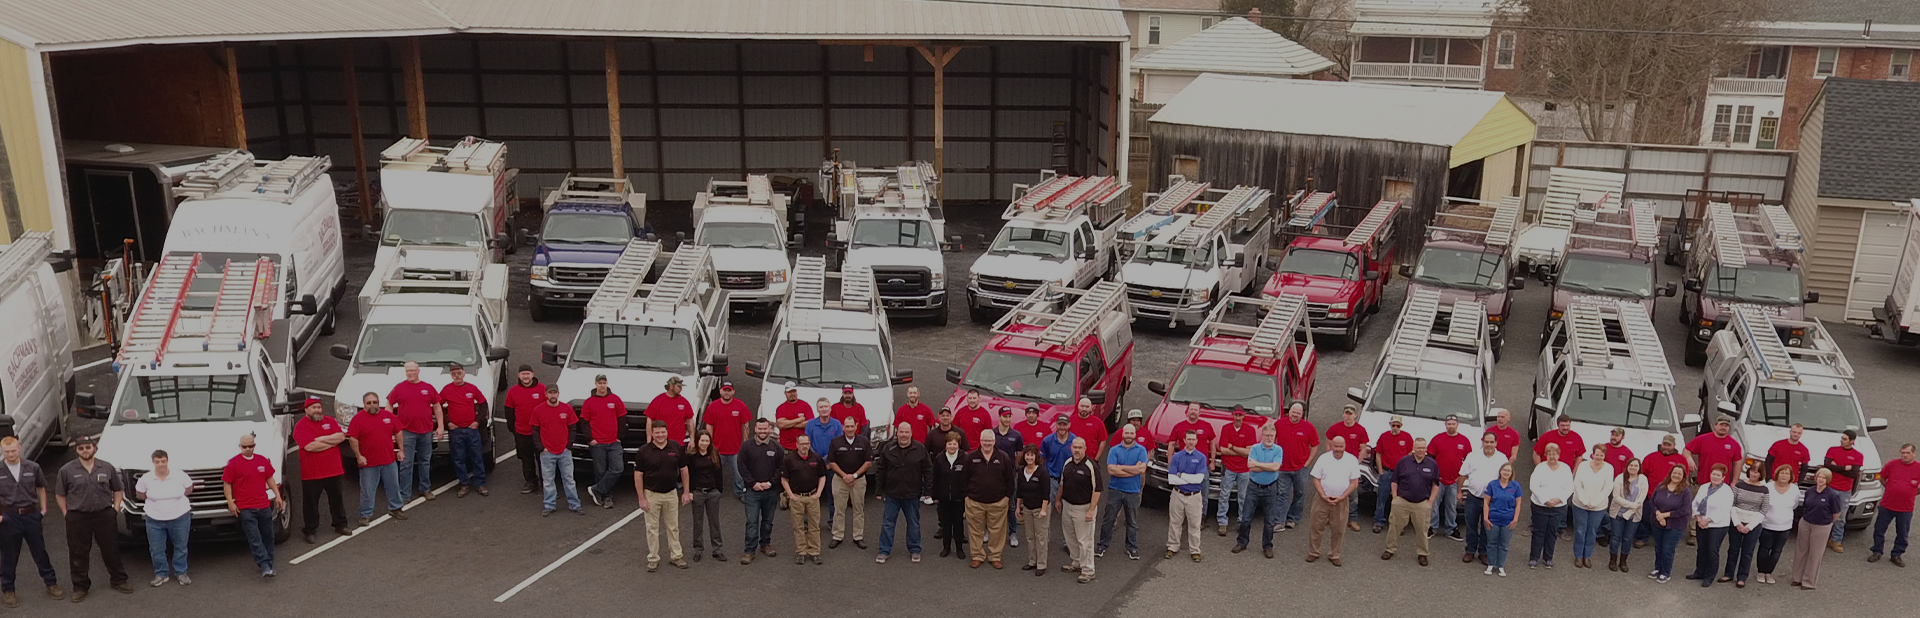 Bachmans Roofing Team Photo